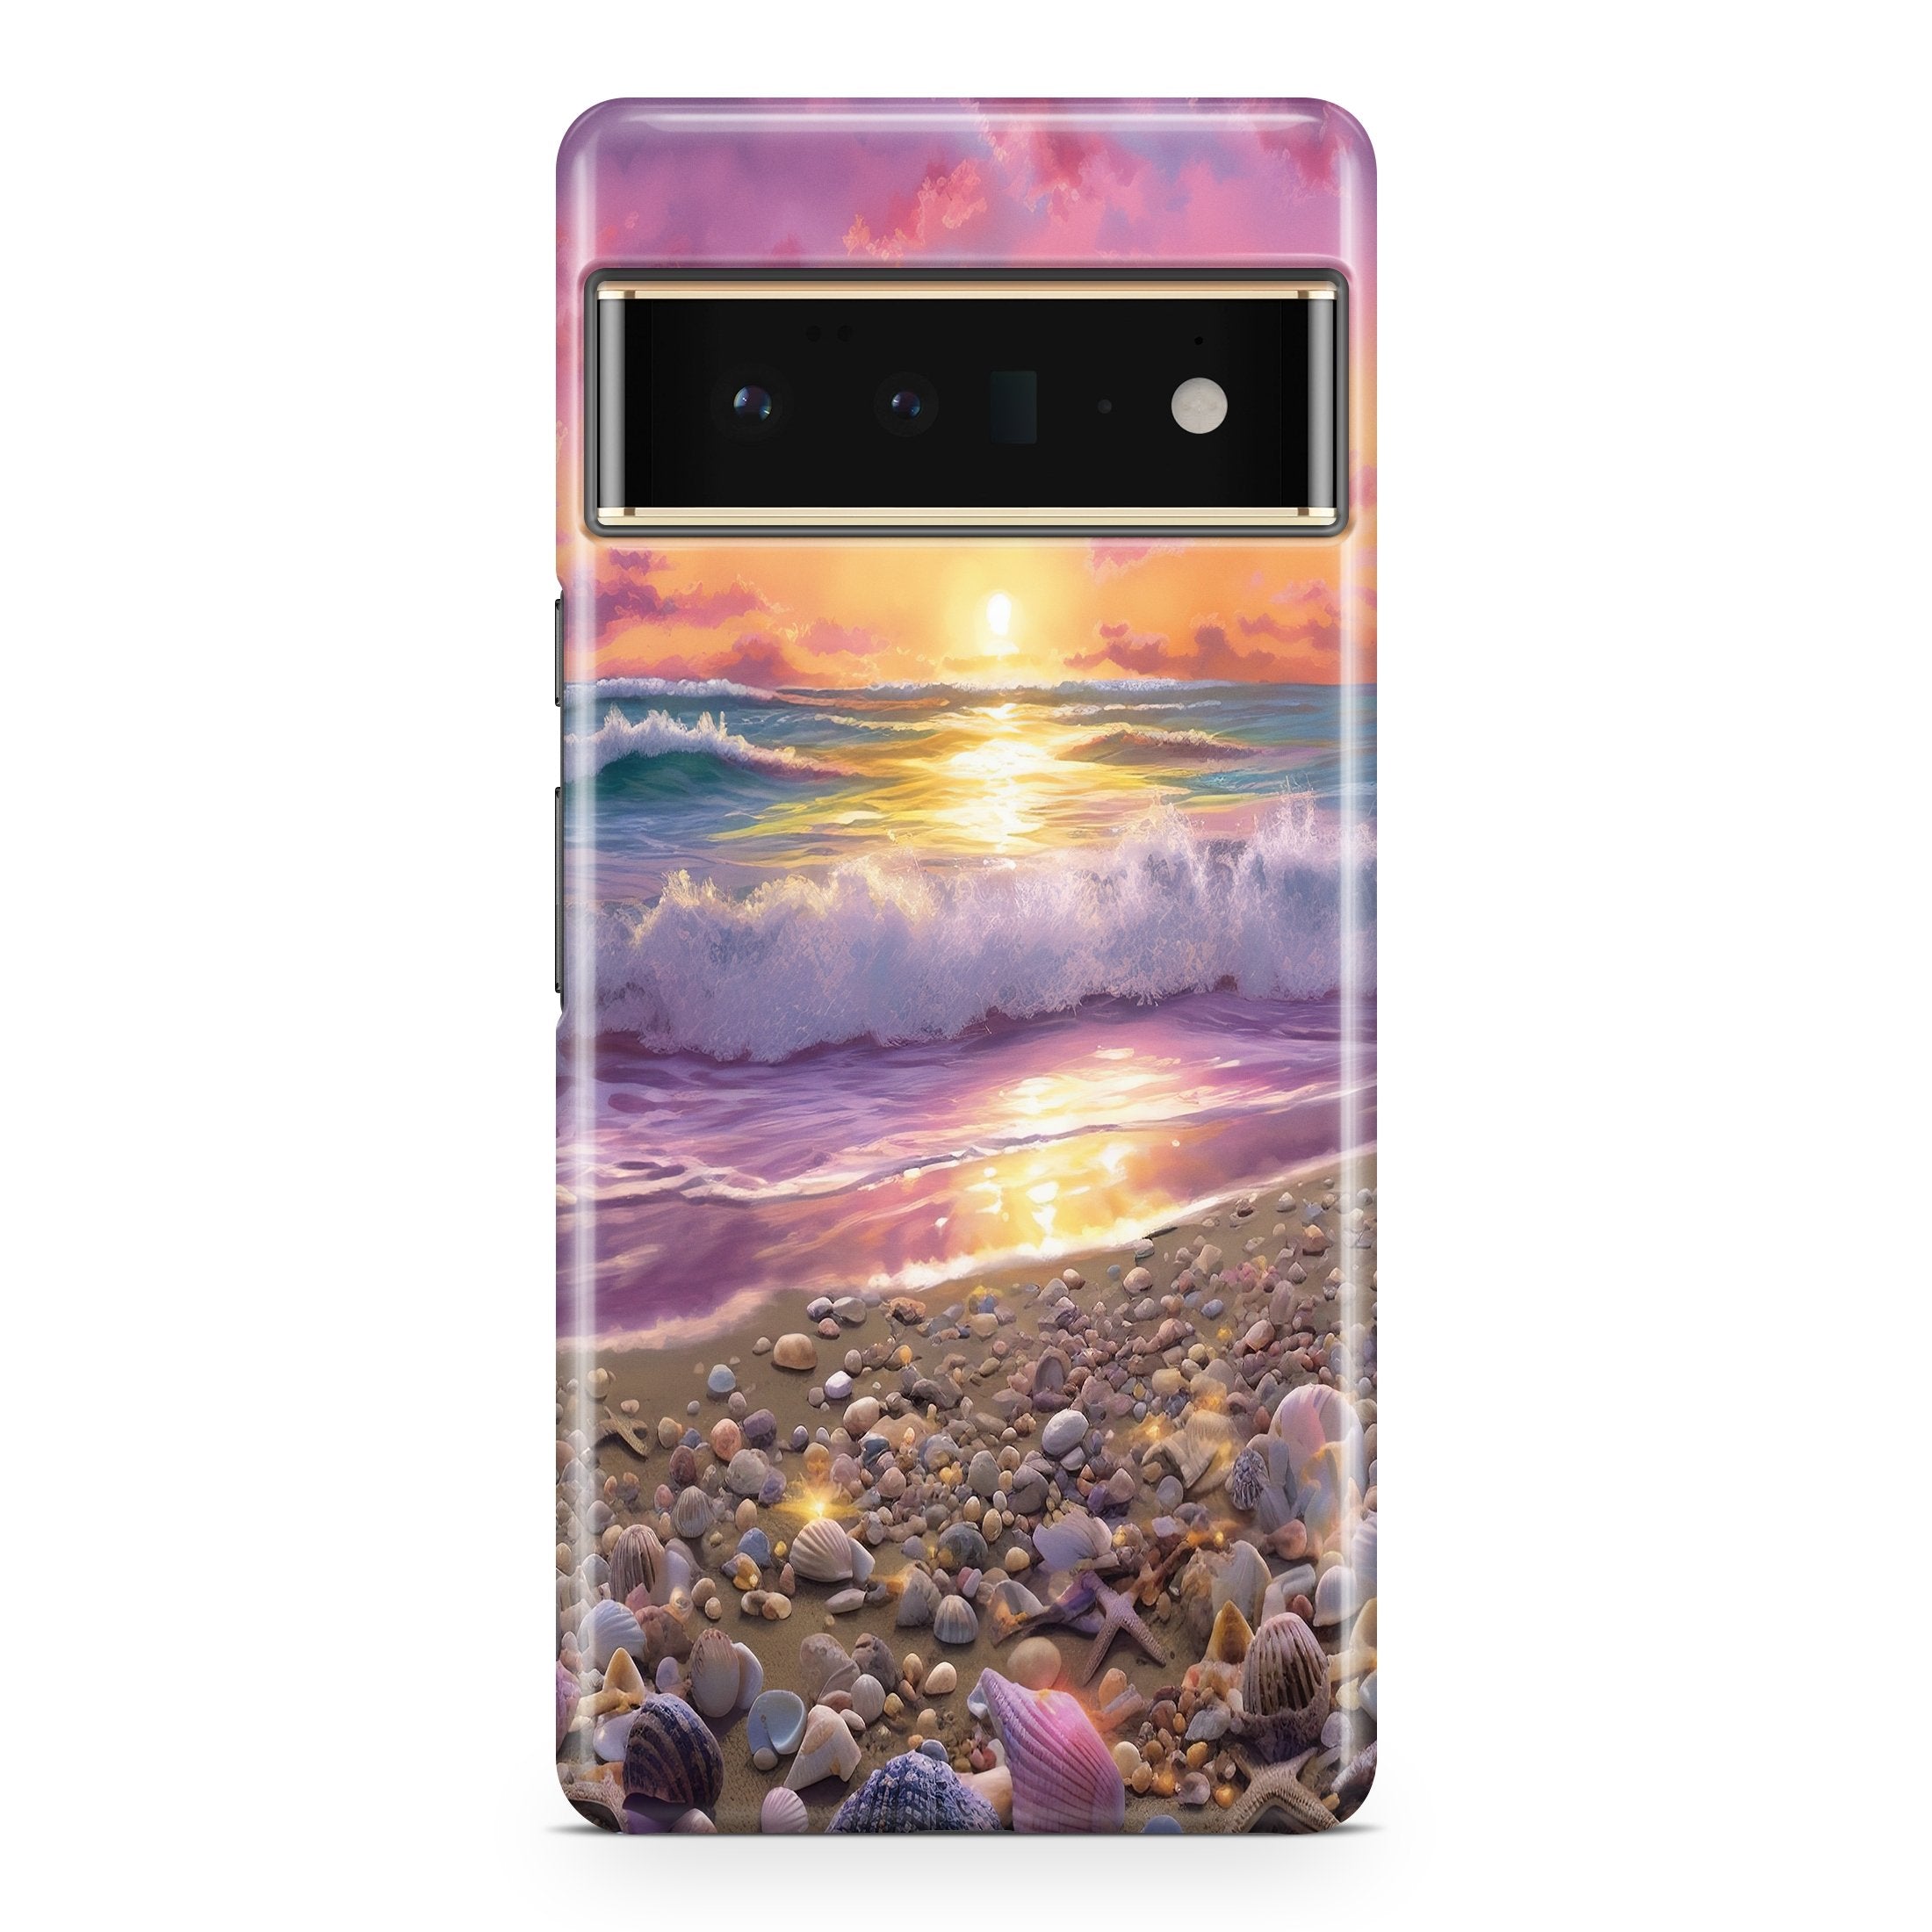 Summer Dreams - Google phone case designs by CaseSwagger